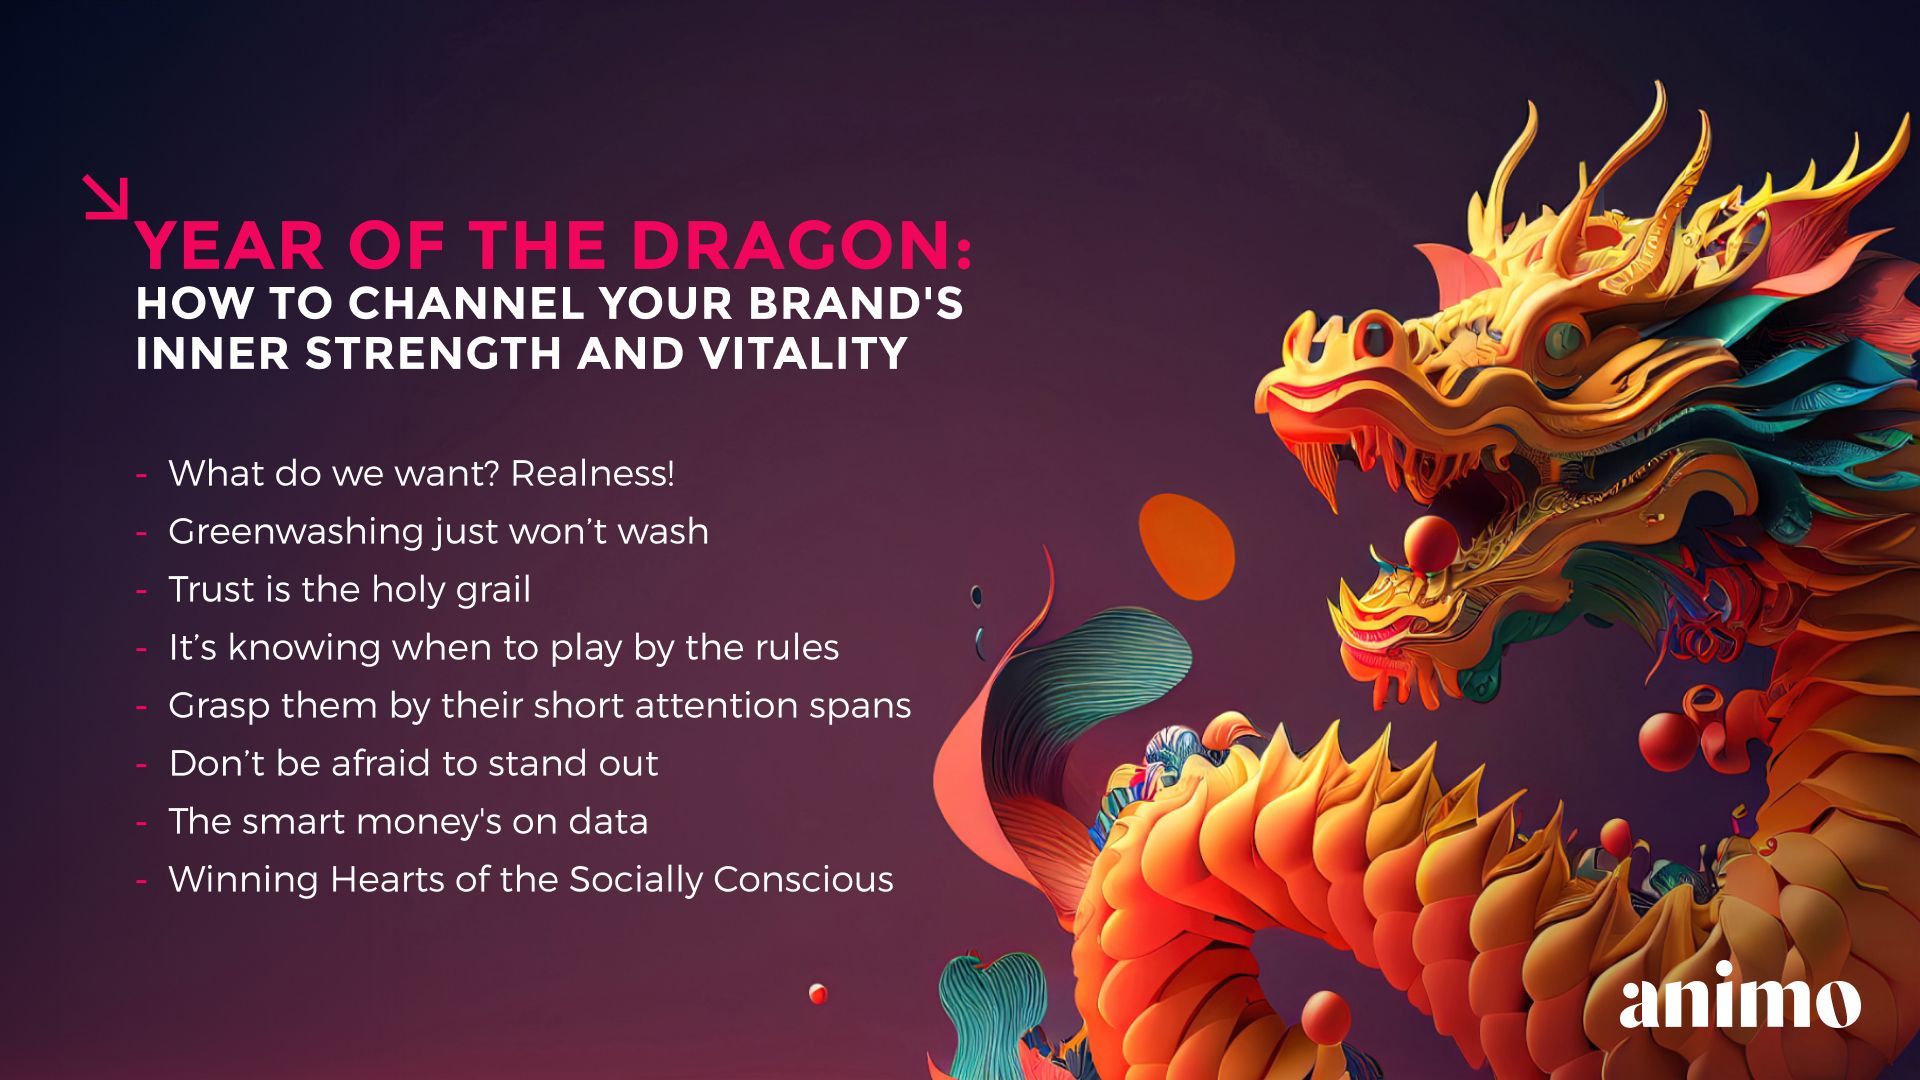 a poster with a dragon on it that says `` year of the dragon : how to channel your brand 's inner strength and vitality ''